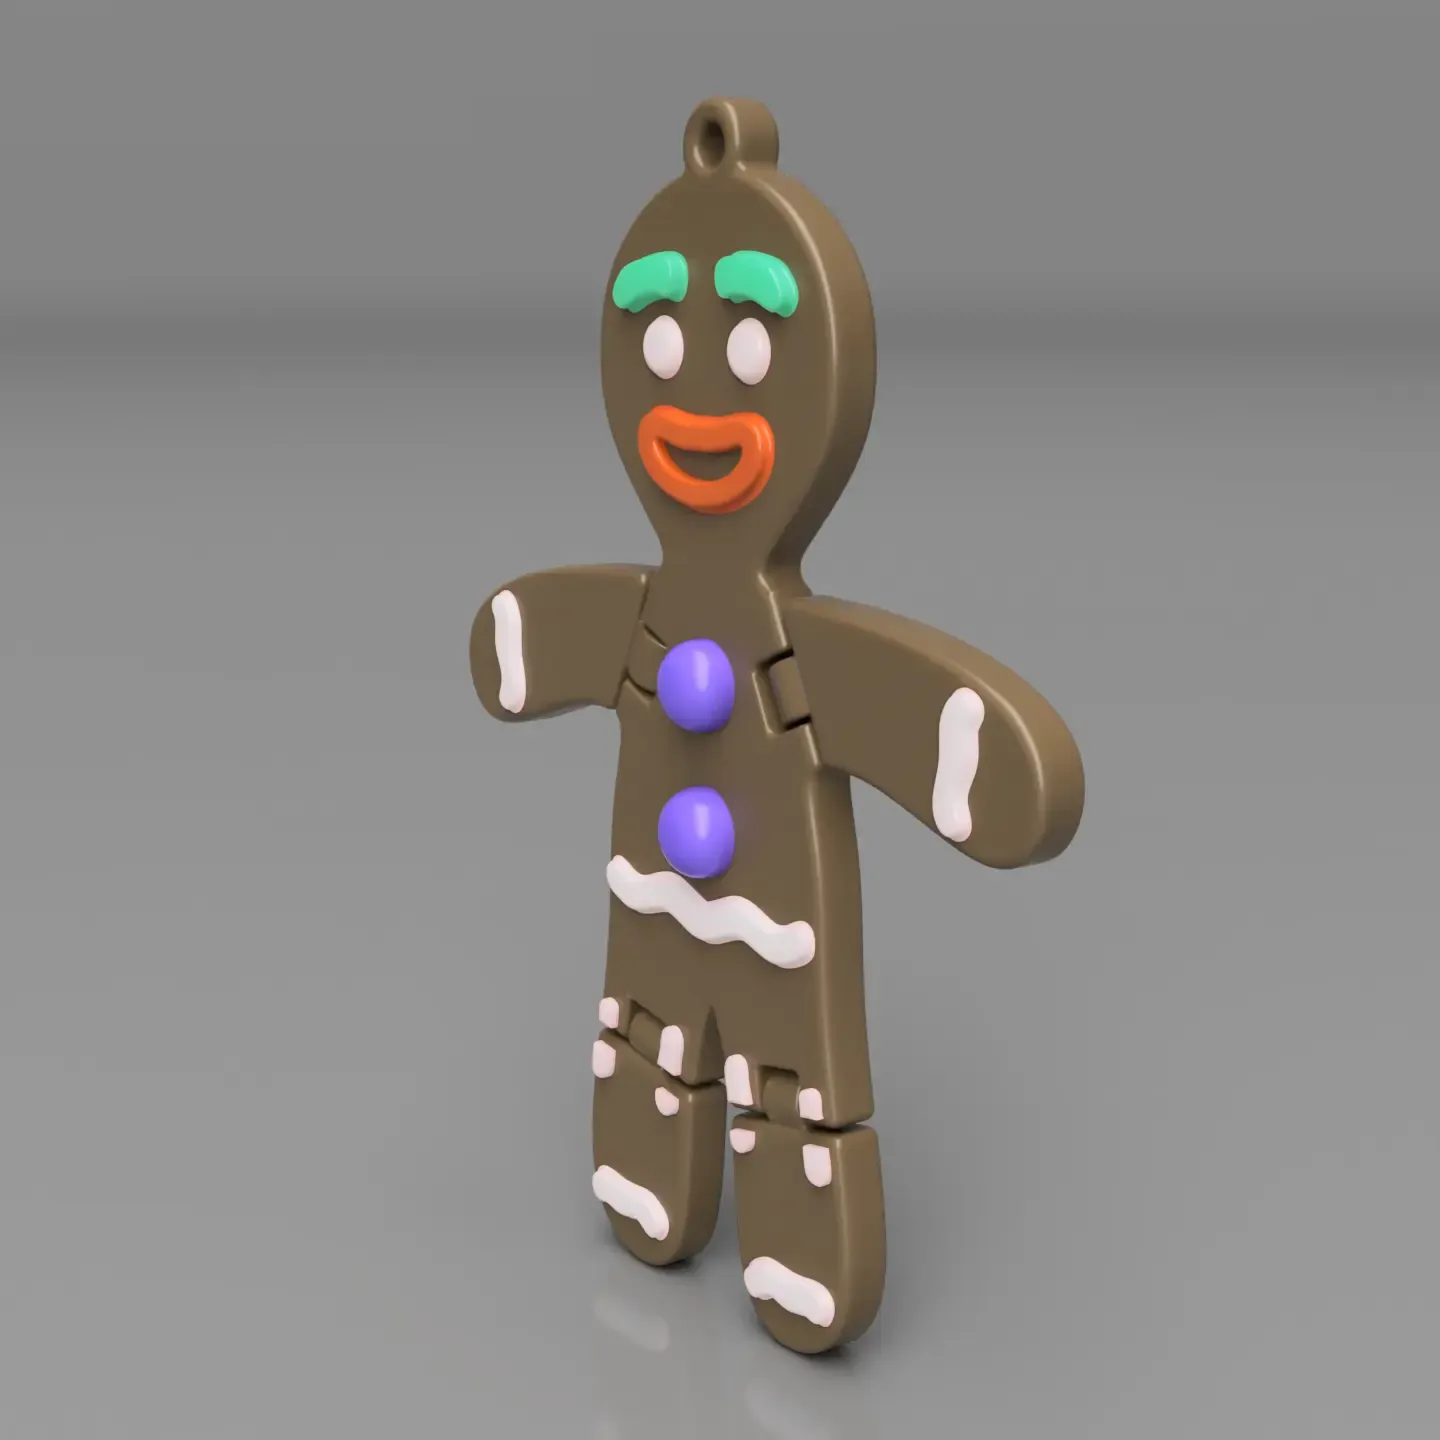 An Articulated Gingy From The Shrek Film Franchise